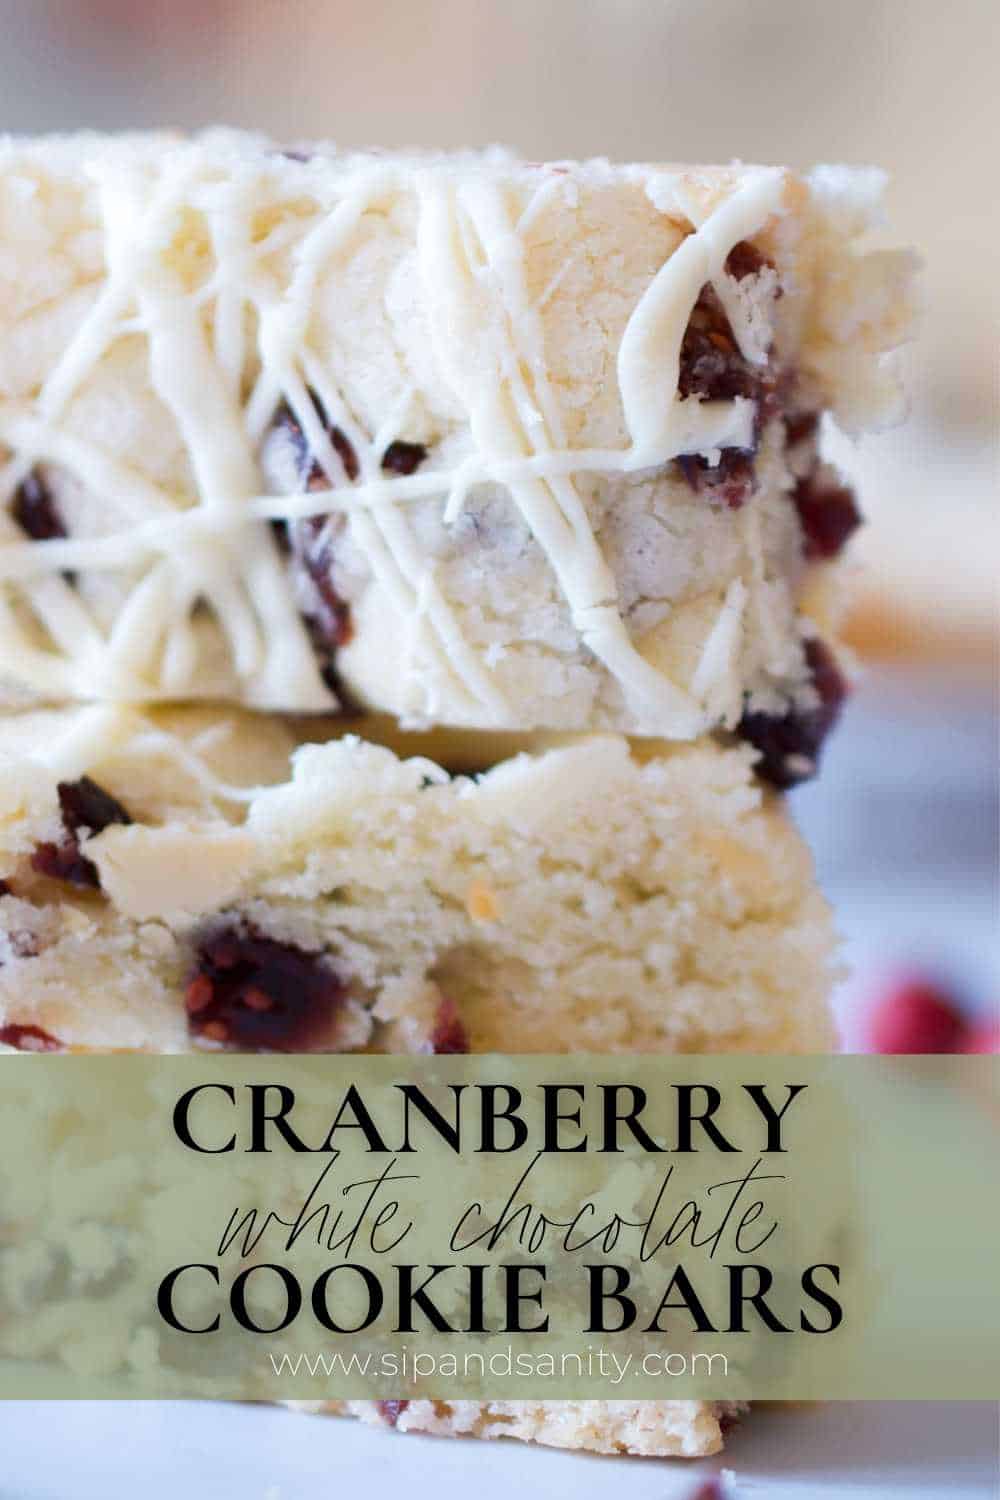 Pin image for cranberry white chocolate cookie bars.